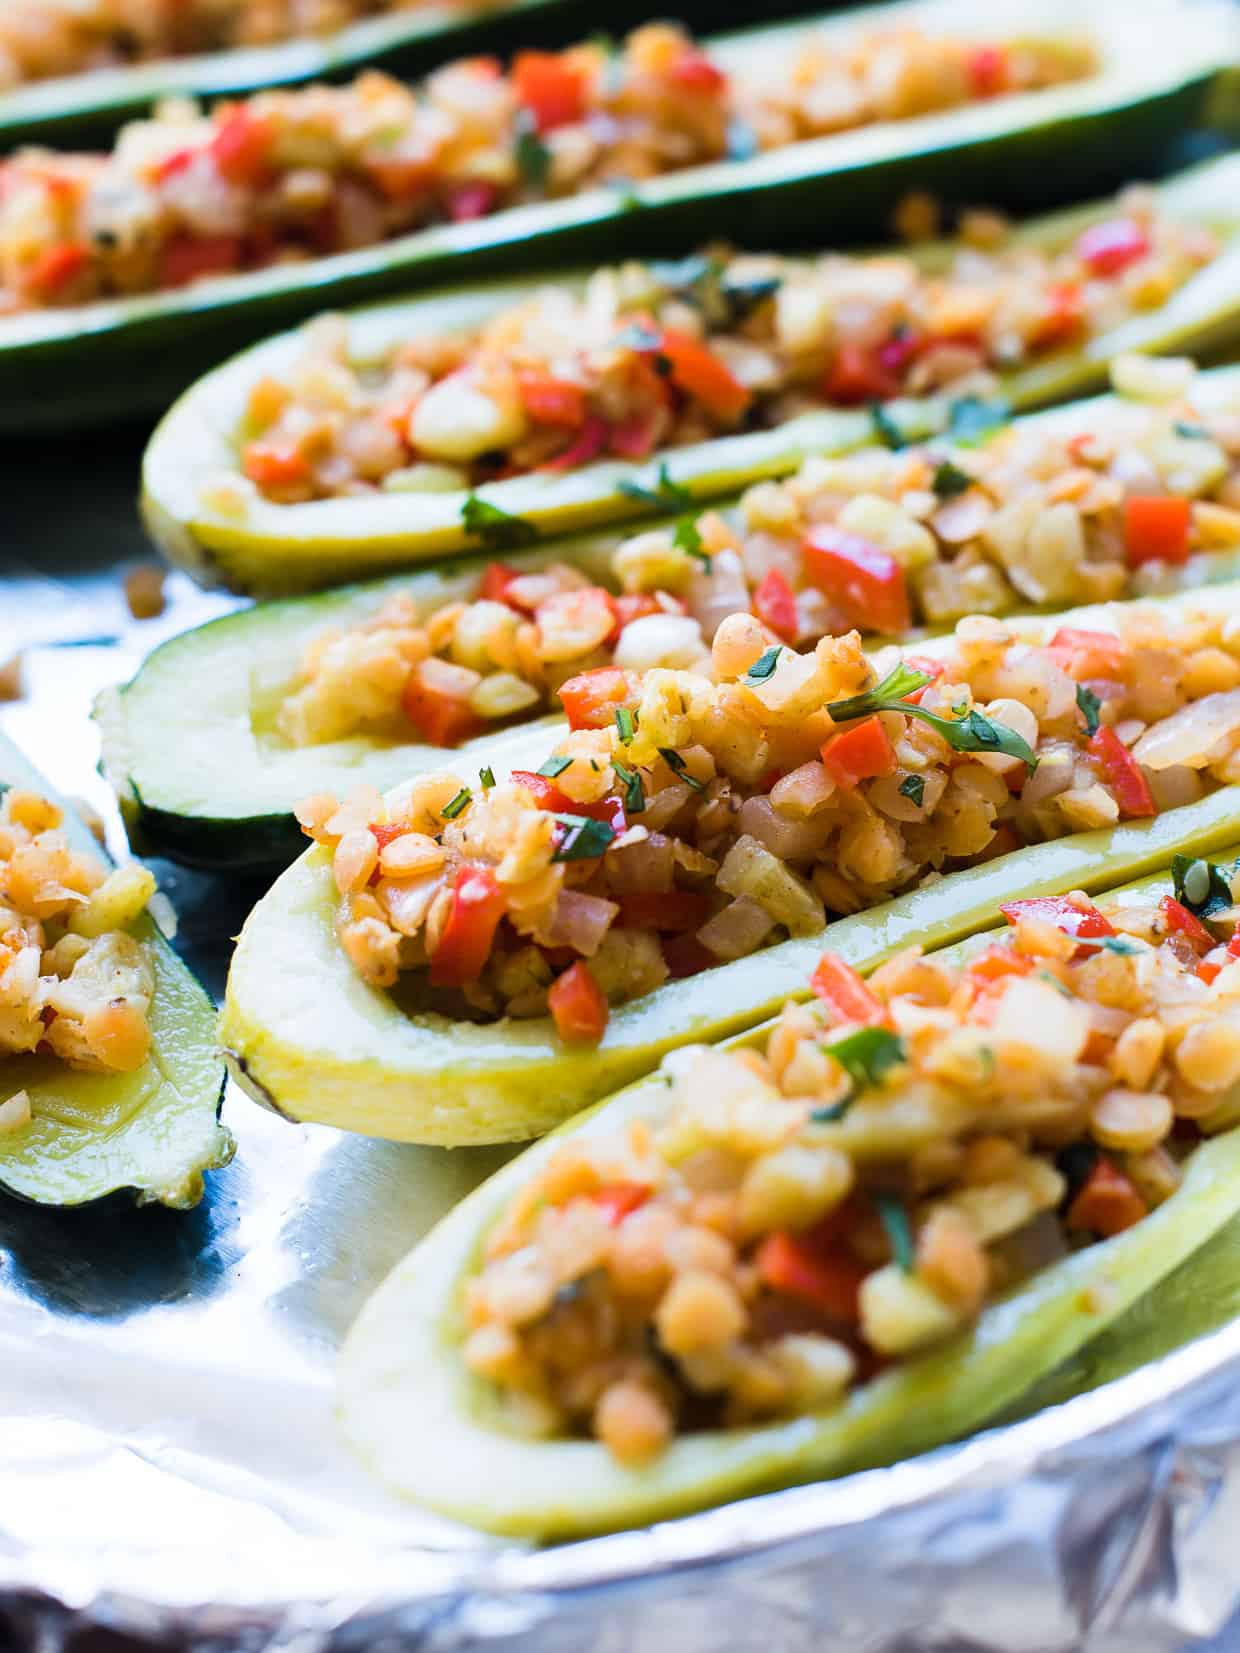 Stuffed yellow squash and zucchini with a tasty lentil filling.